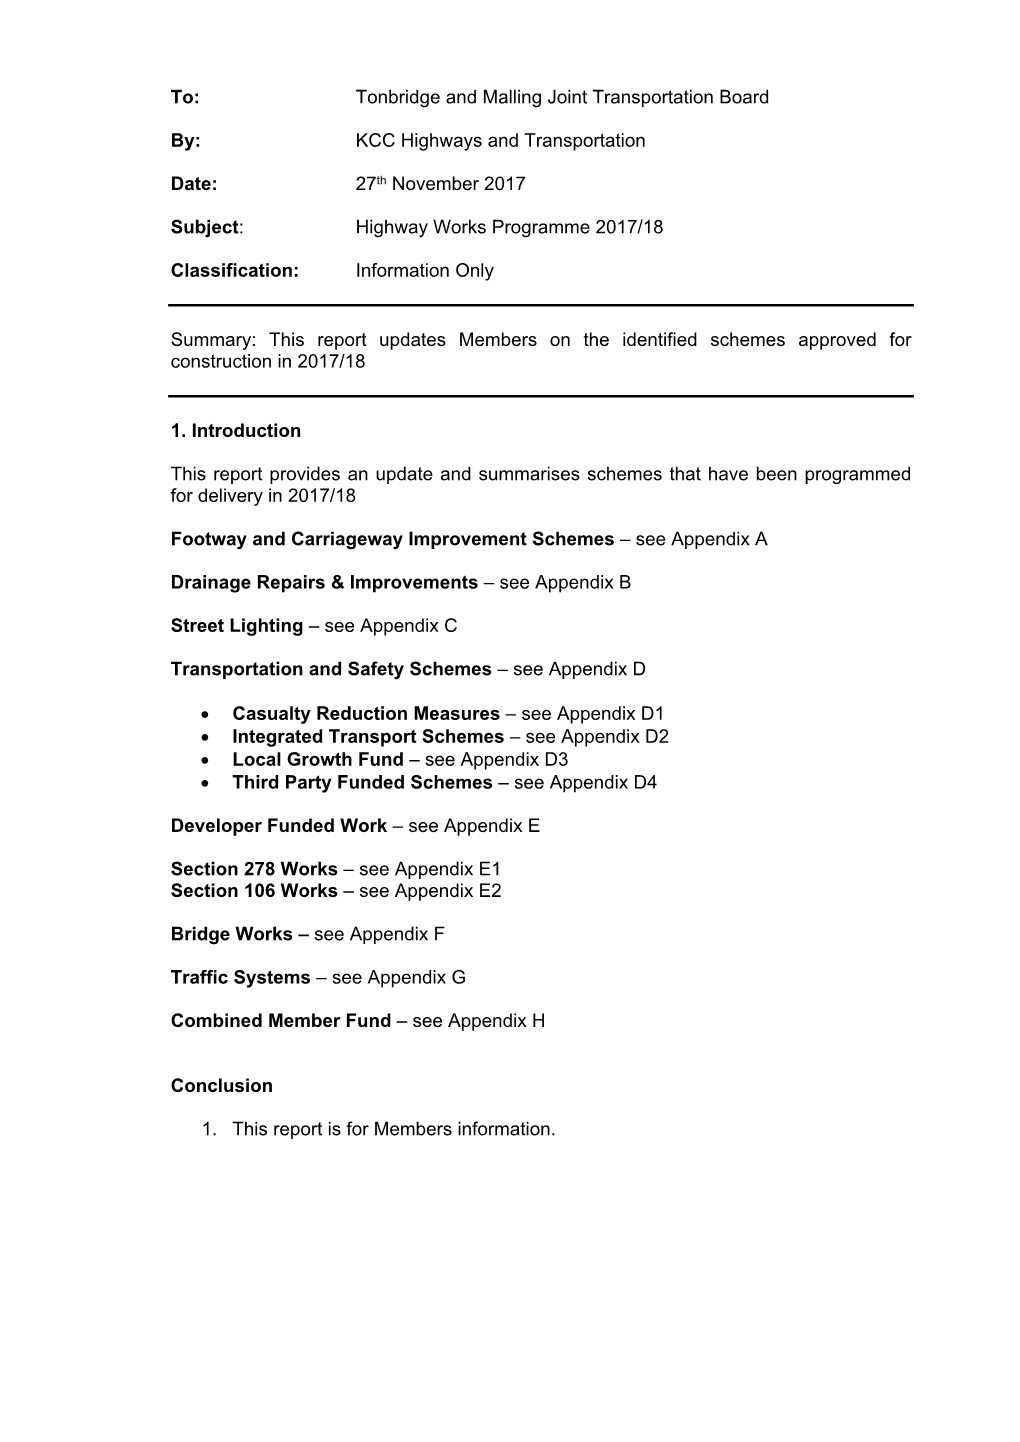 Subject: Highway Works Programme 2011/12